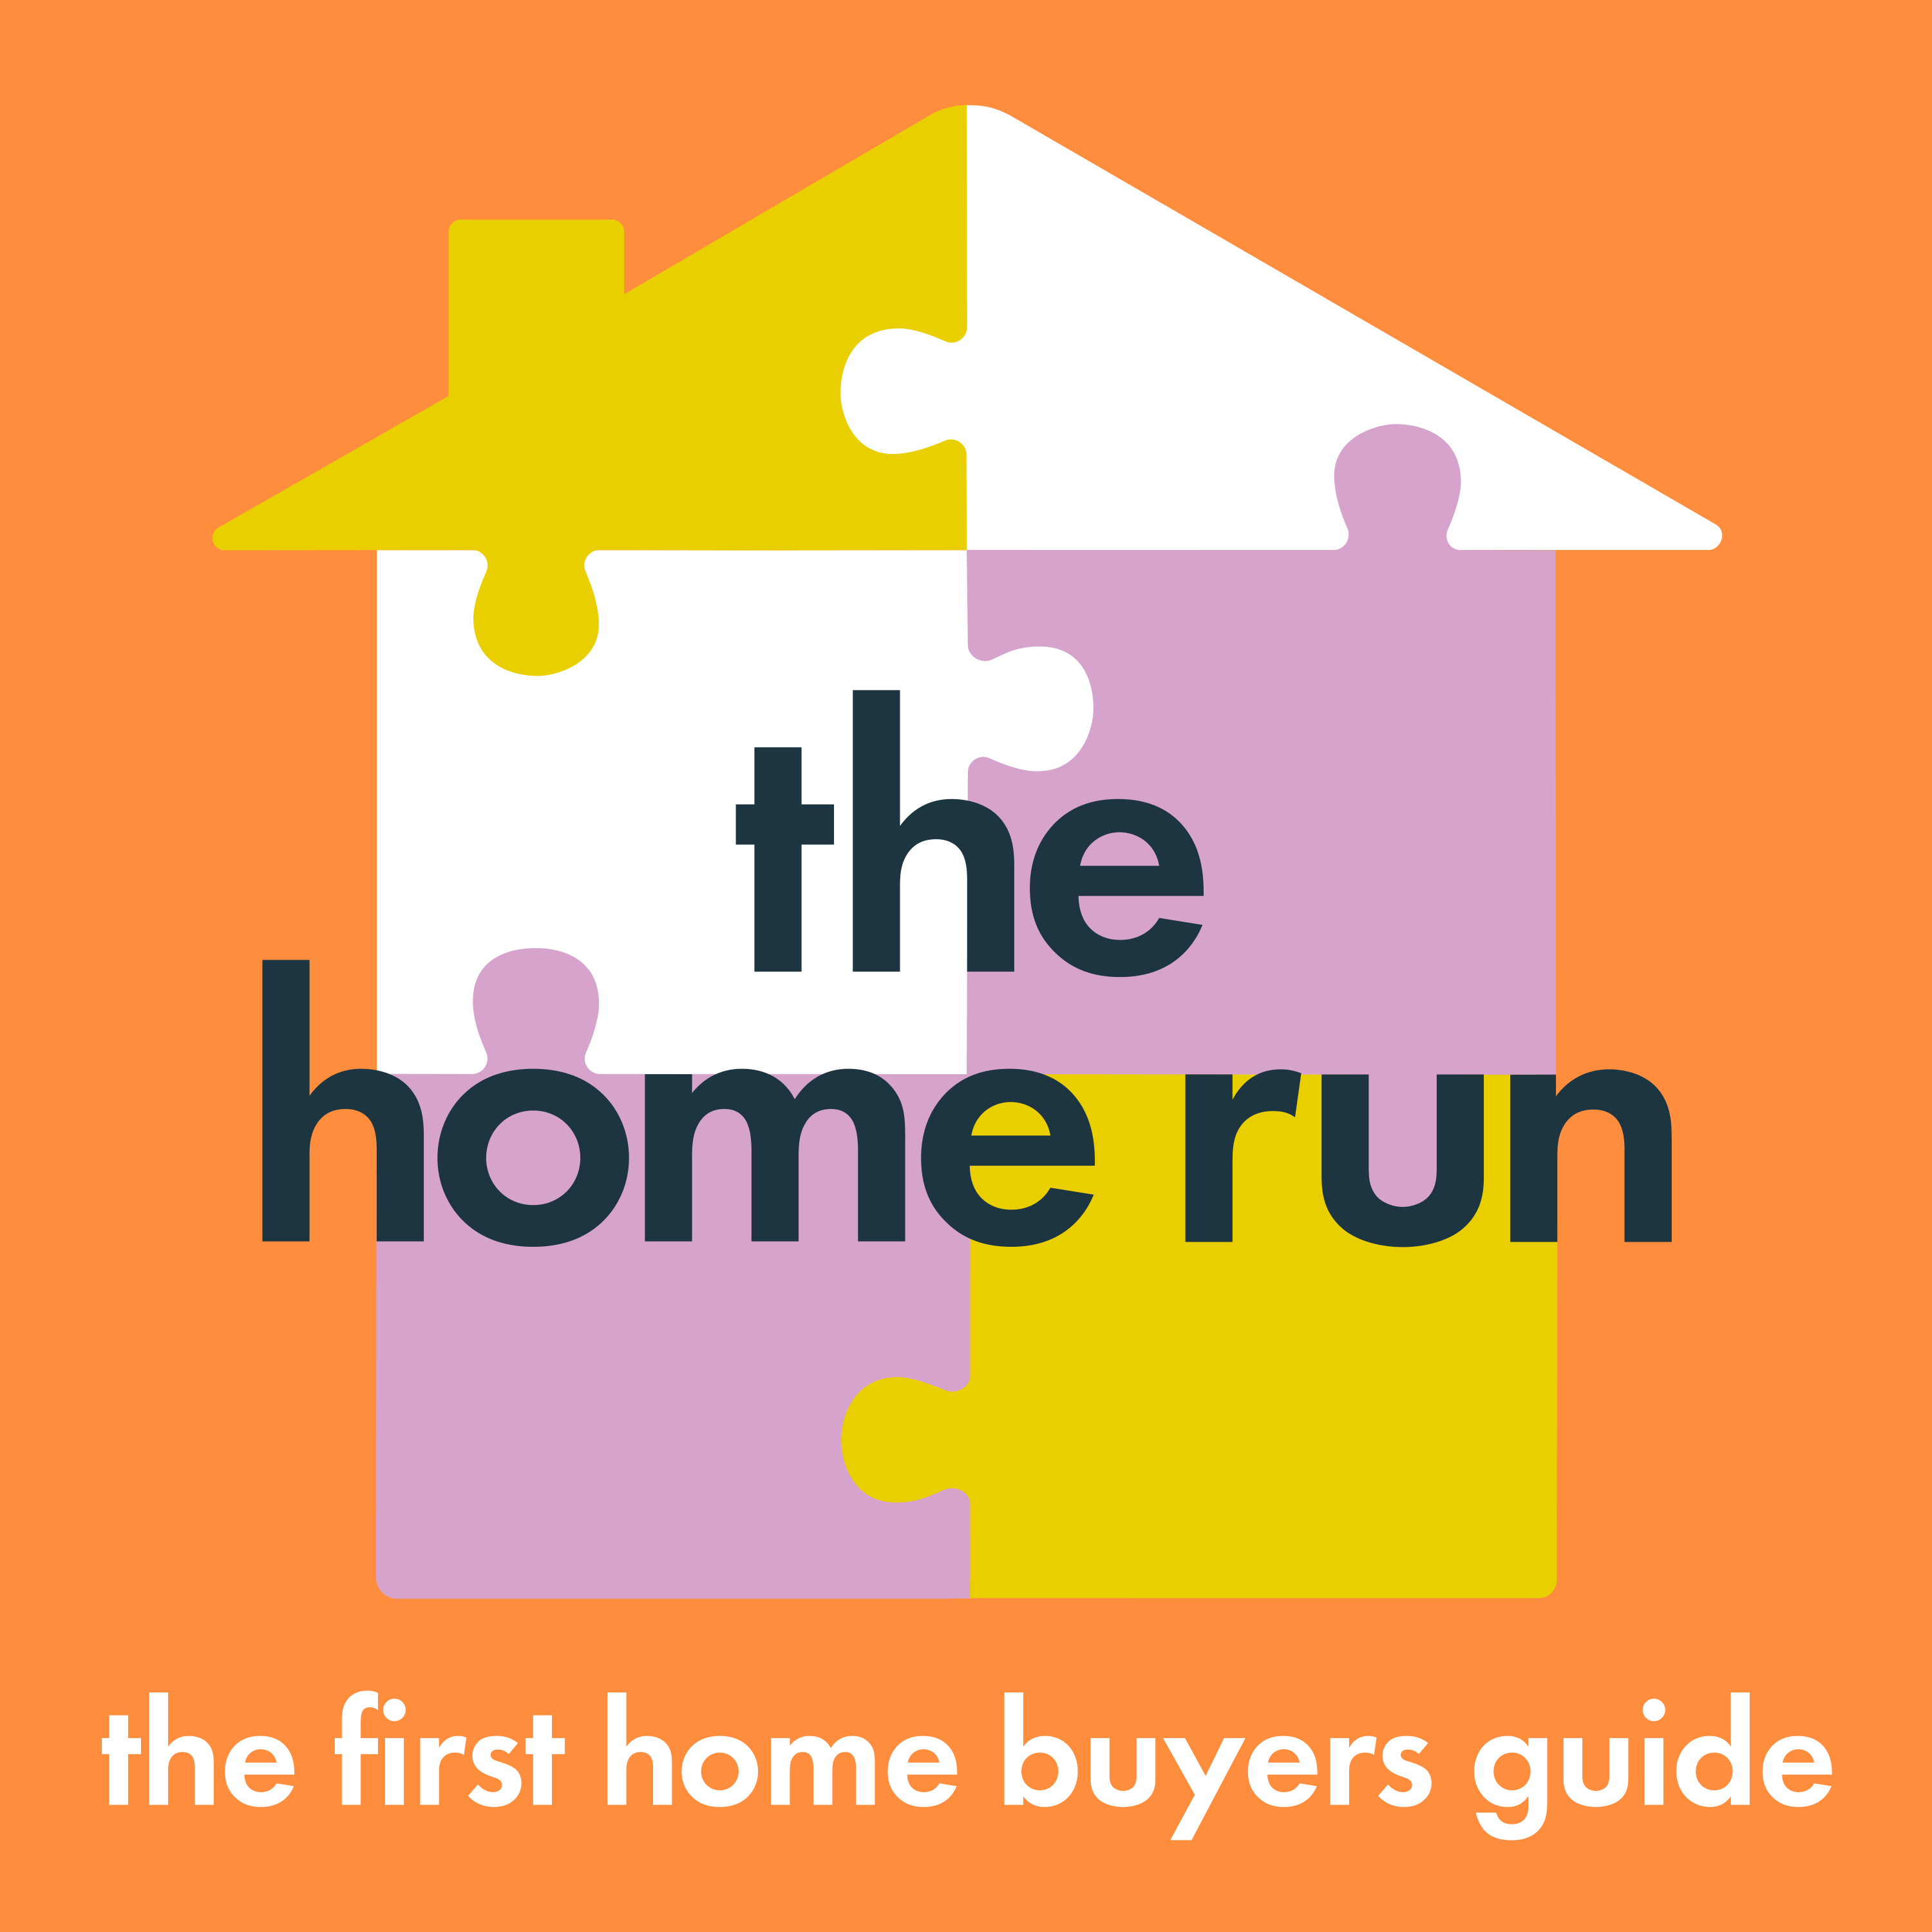 The complete guide to buying your first home